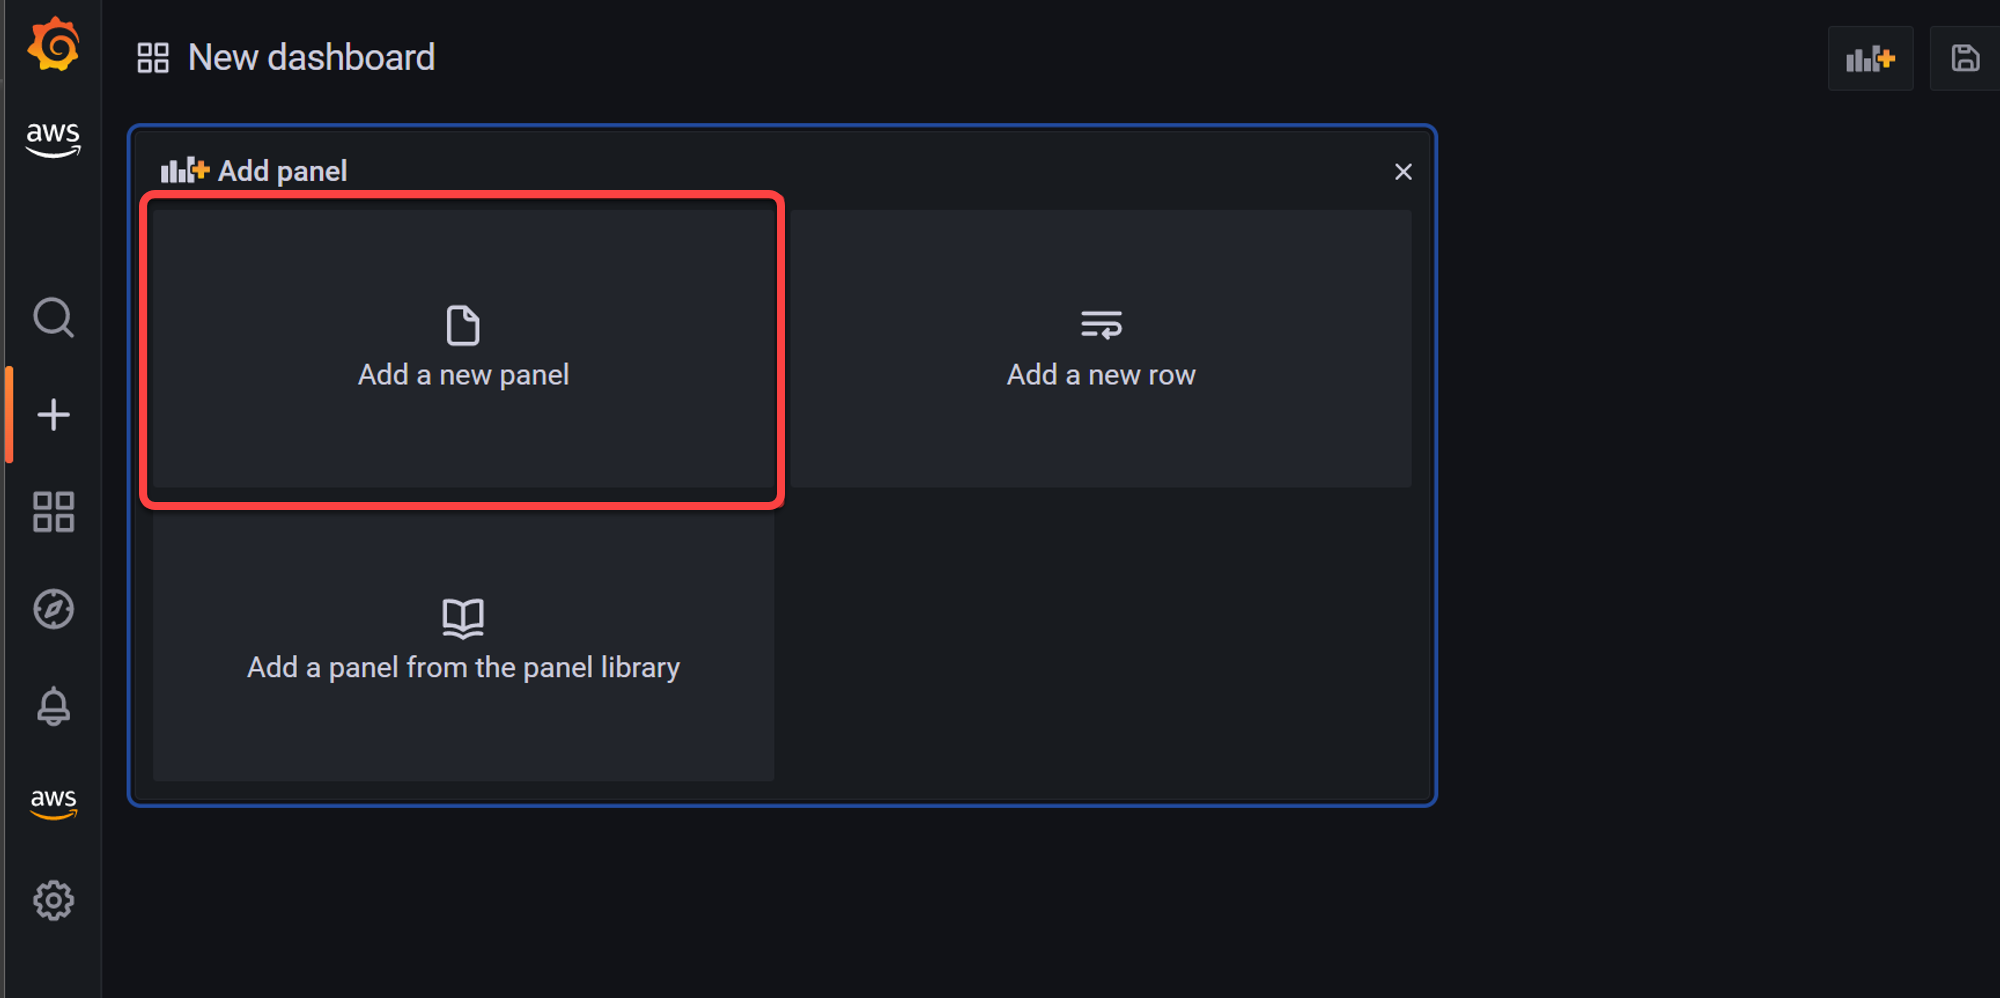 Creating a new panel in the dashboard